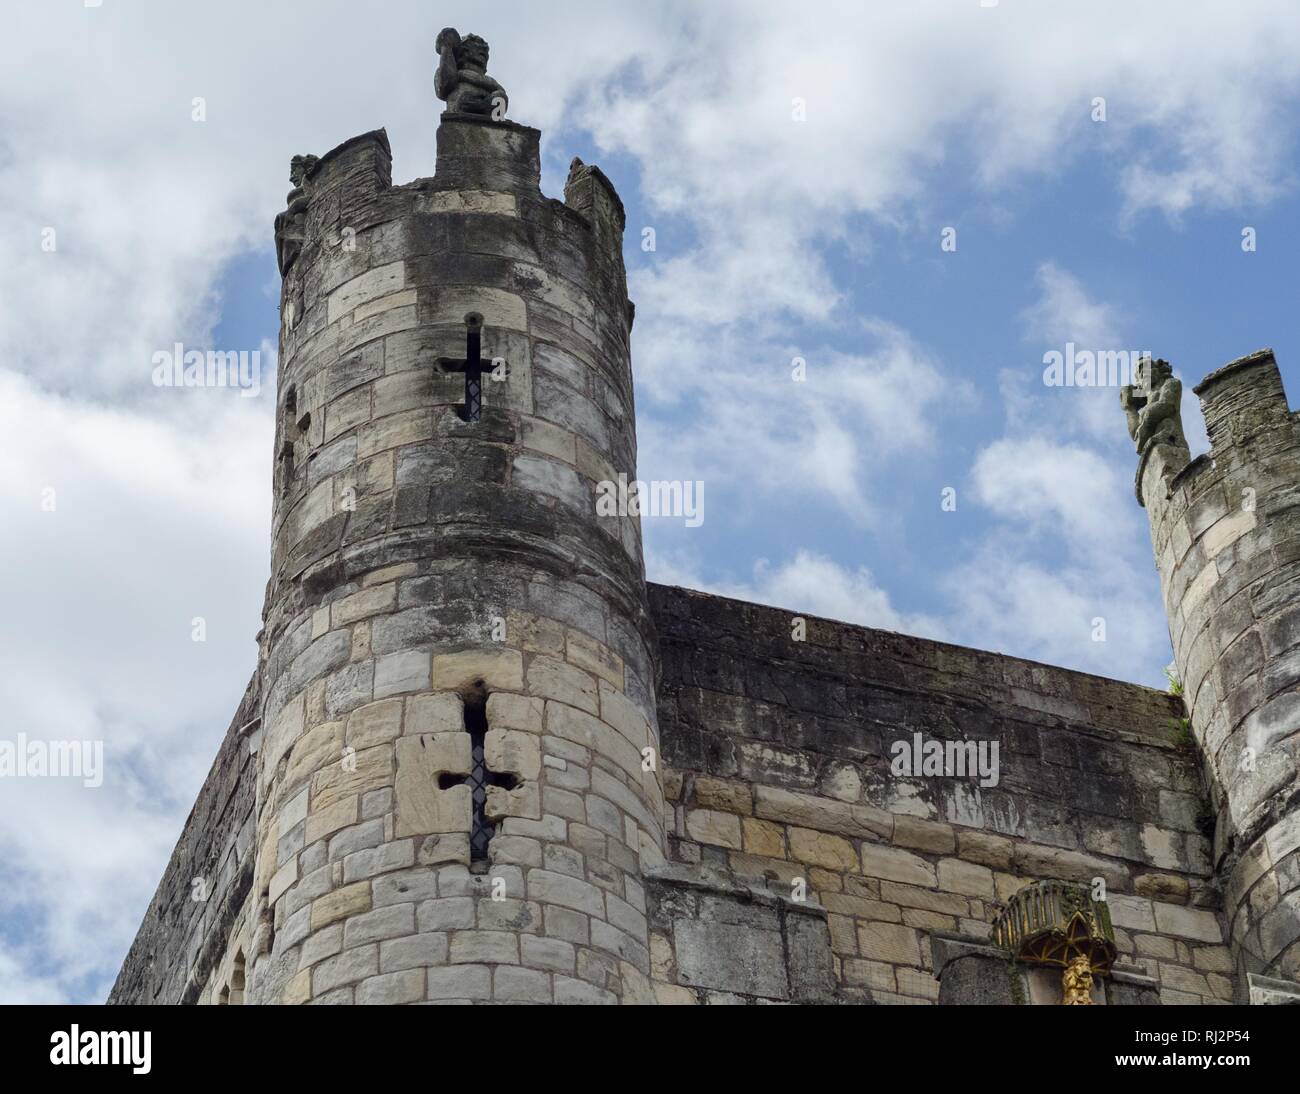 A gatehouse in the walled fortifications in York, England. Arrowslits are visible which provided defense against intruders. Stock Photo